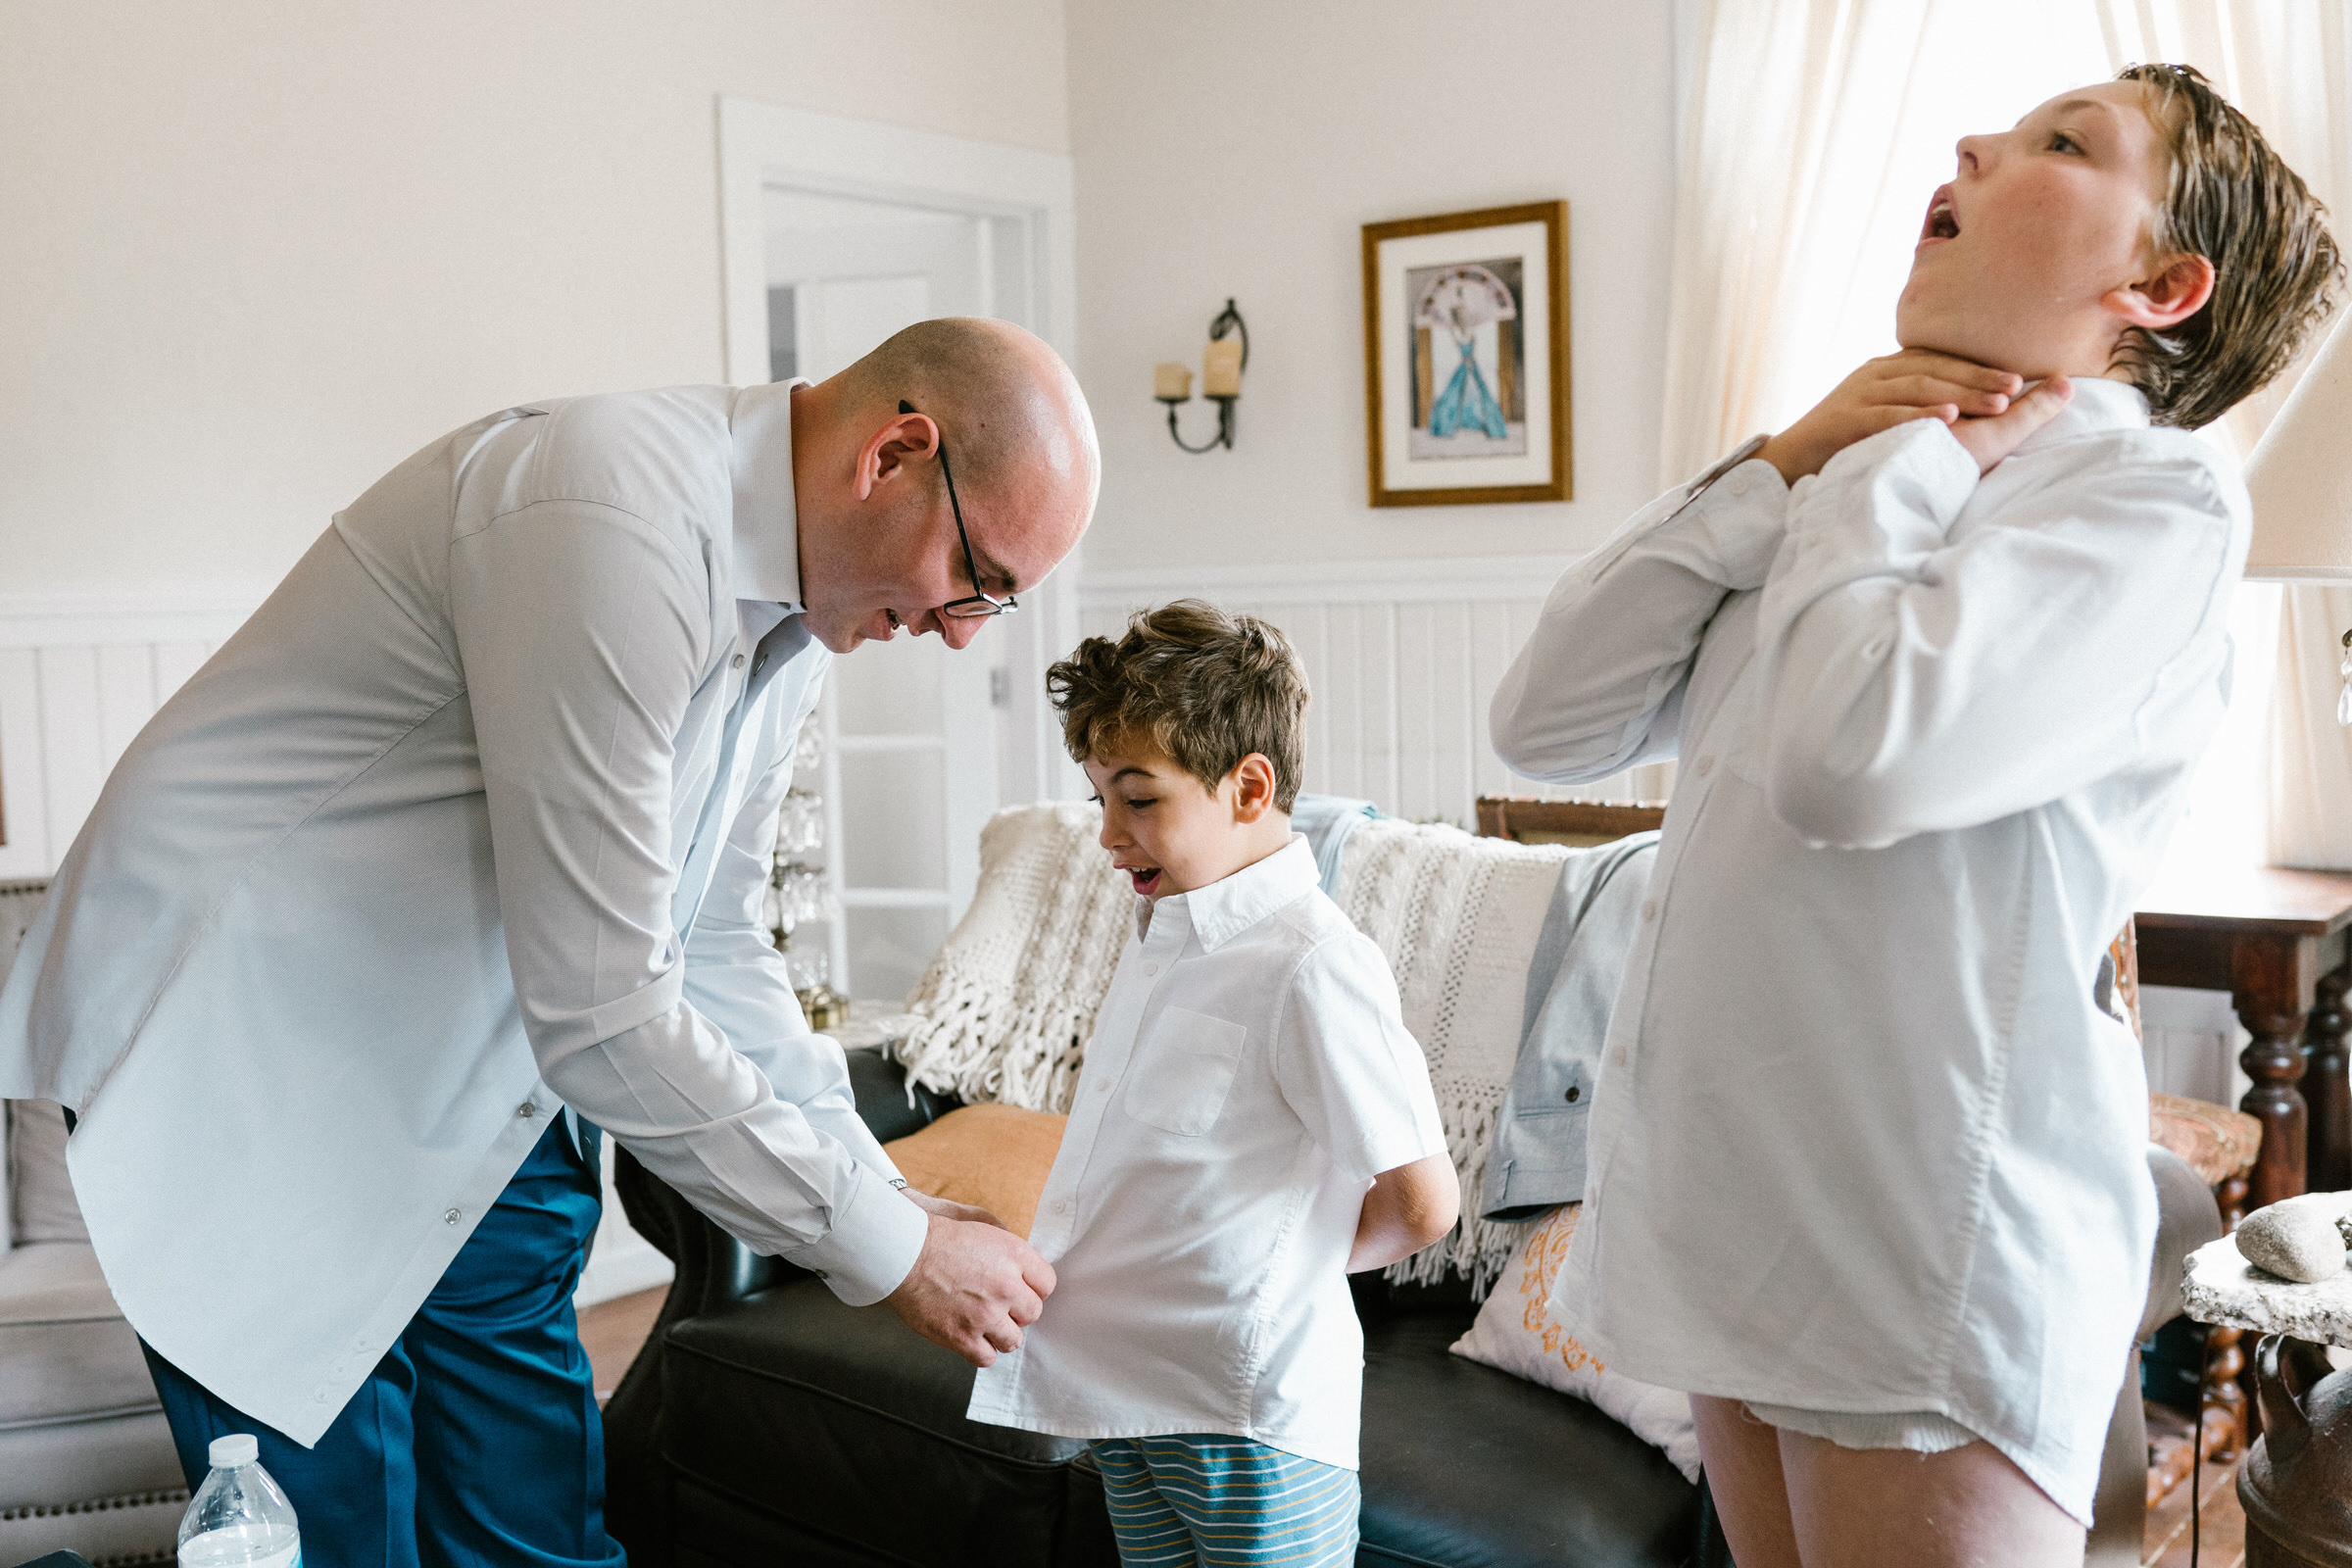 Wayfarer Whidbey Island Wedding: Funny candid of the groom and his sons getting ready.